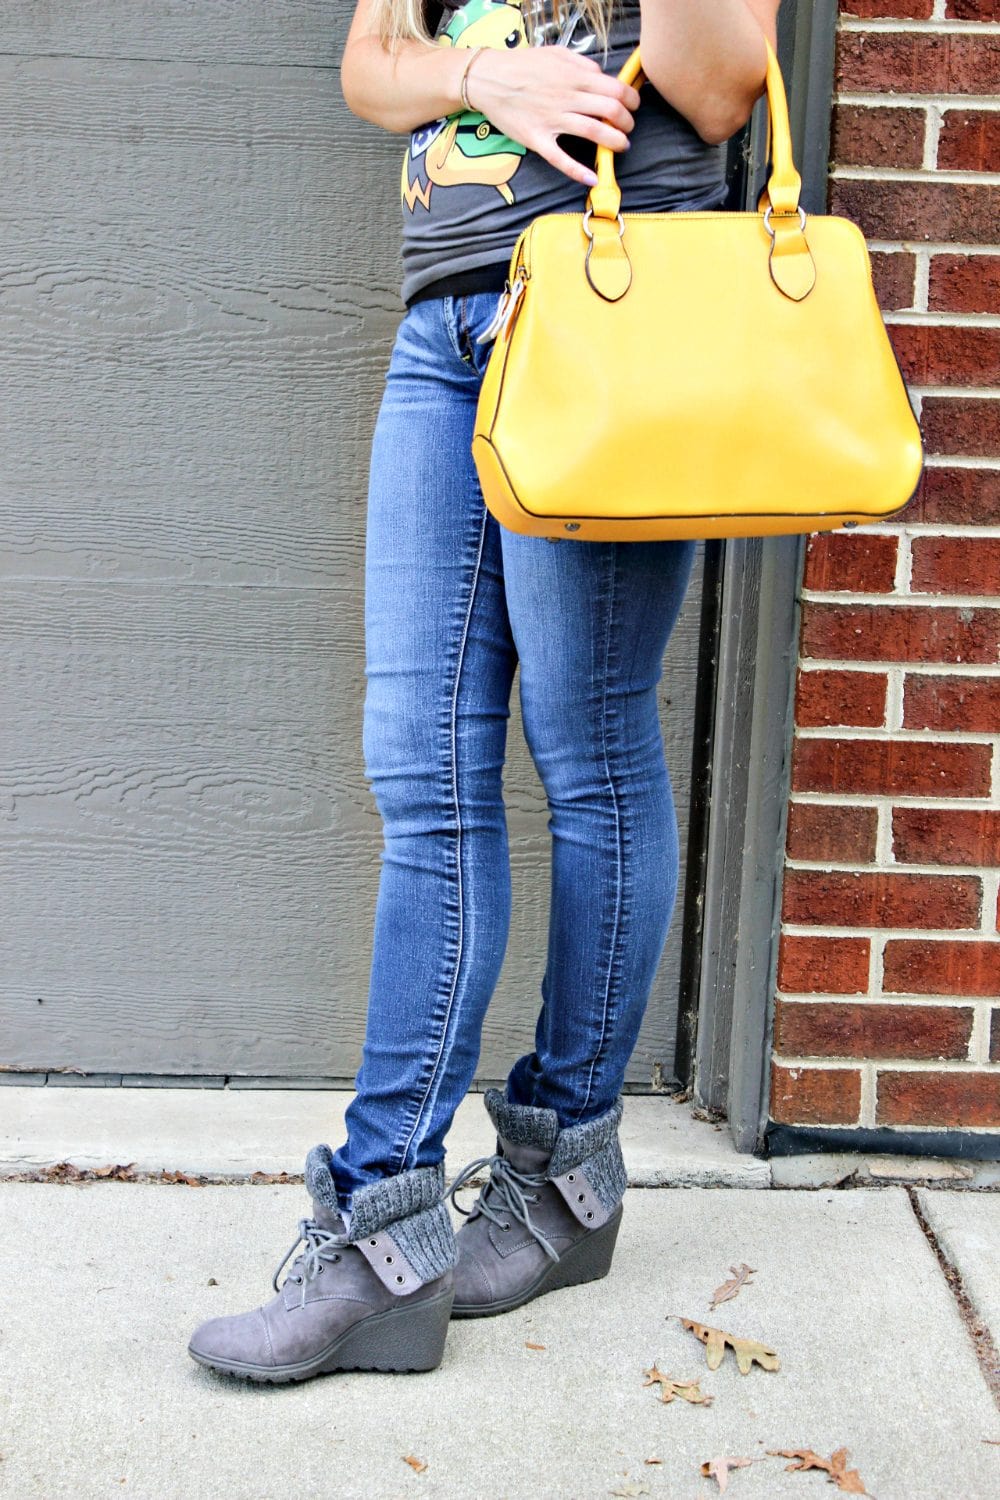 Girl in jeans with a bright yellow purse. 